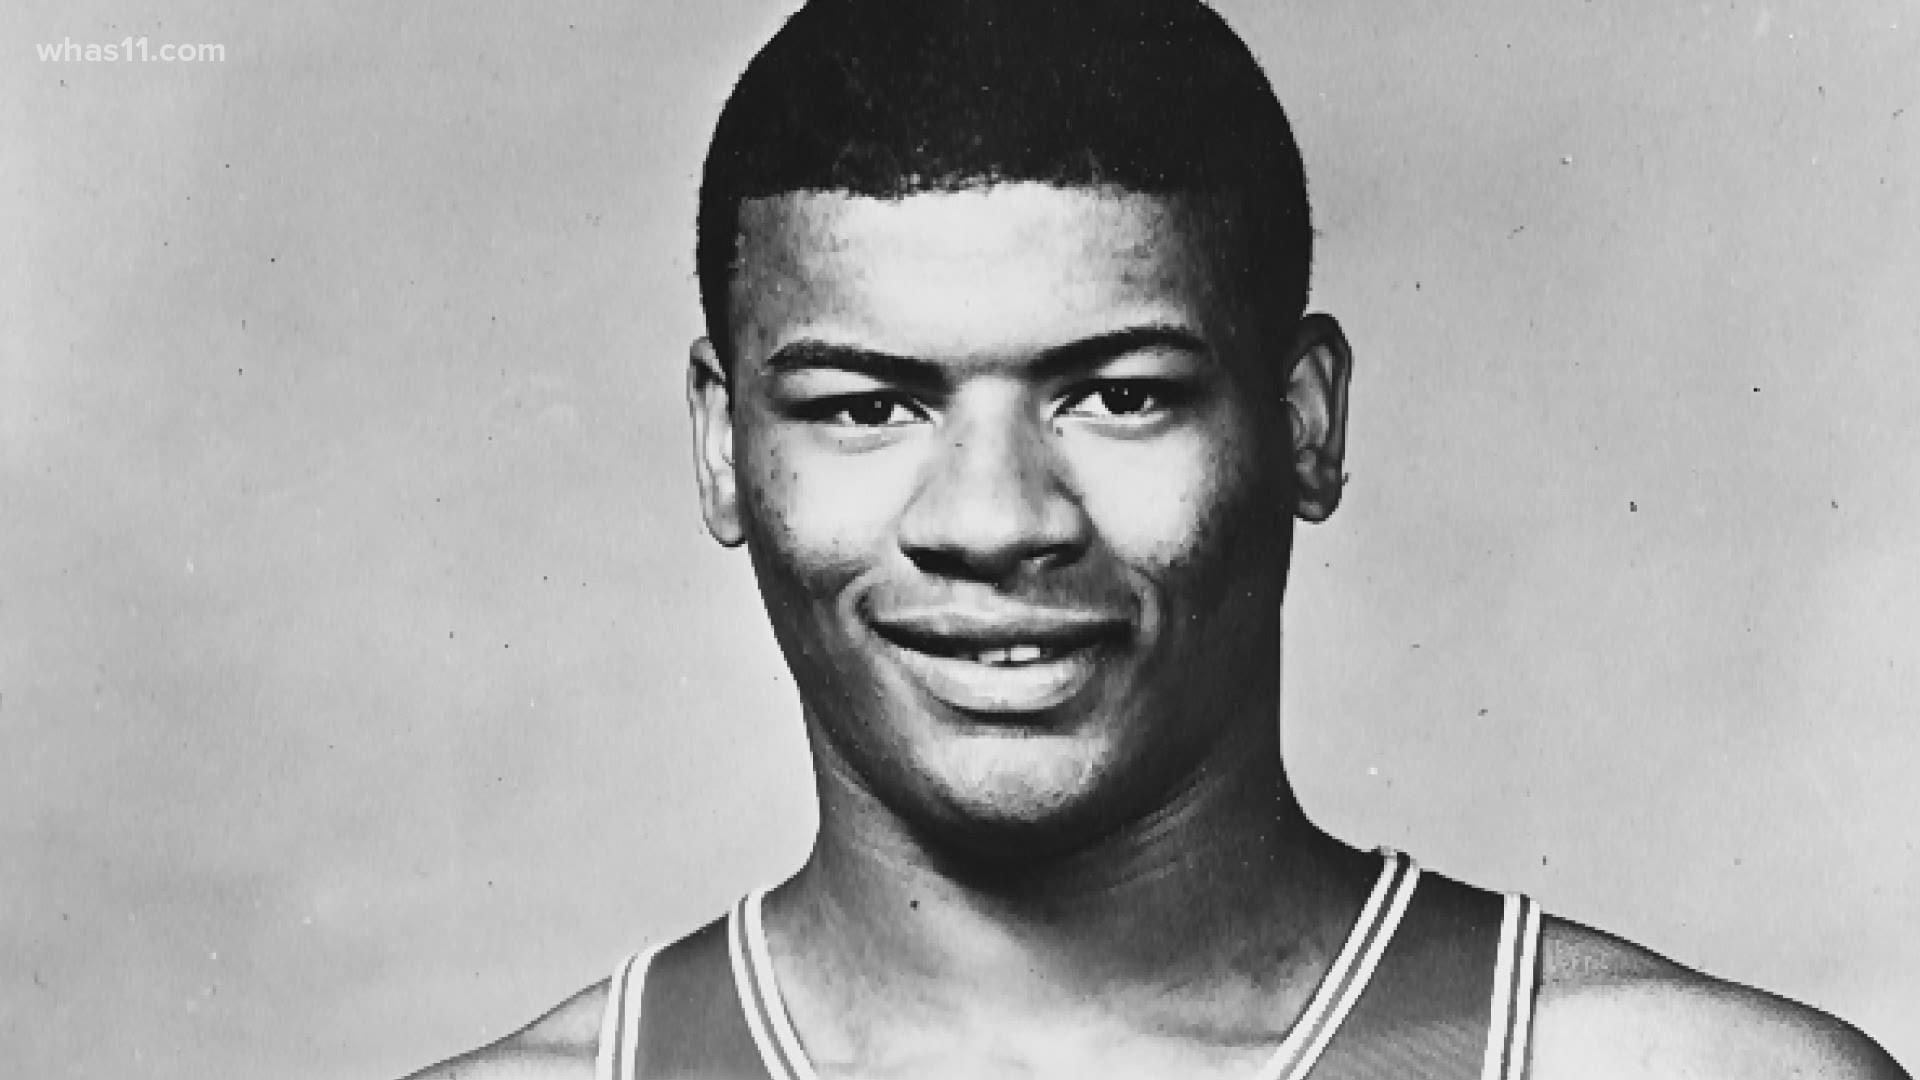 Wes Unseld was not the first Black player to suit up for Louisville men’s basketball. But he was the one who changed the Cardinal program.